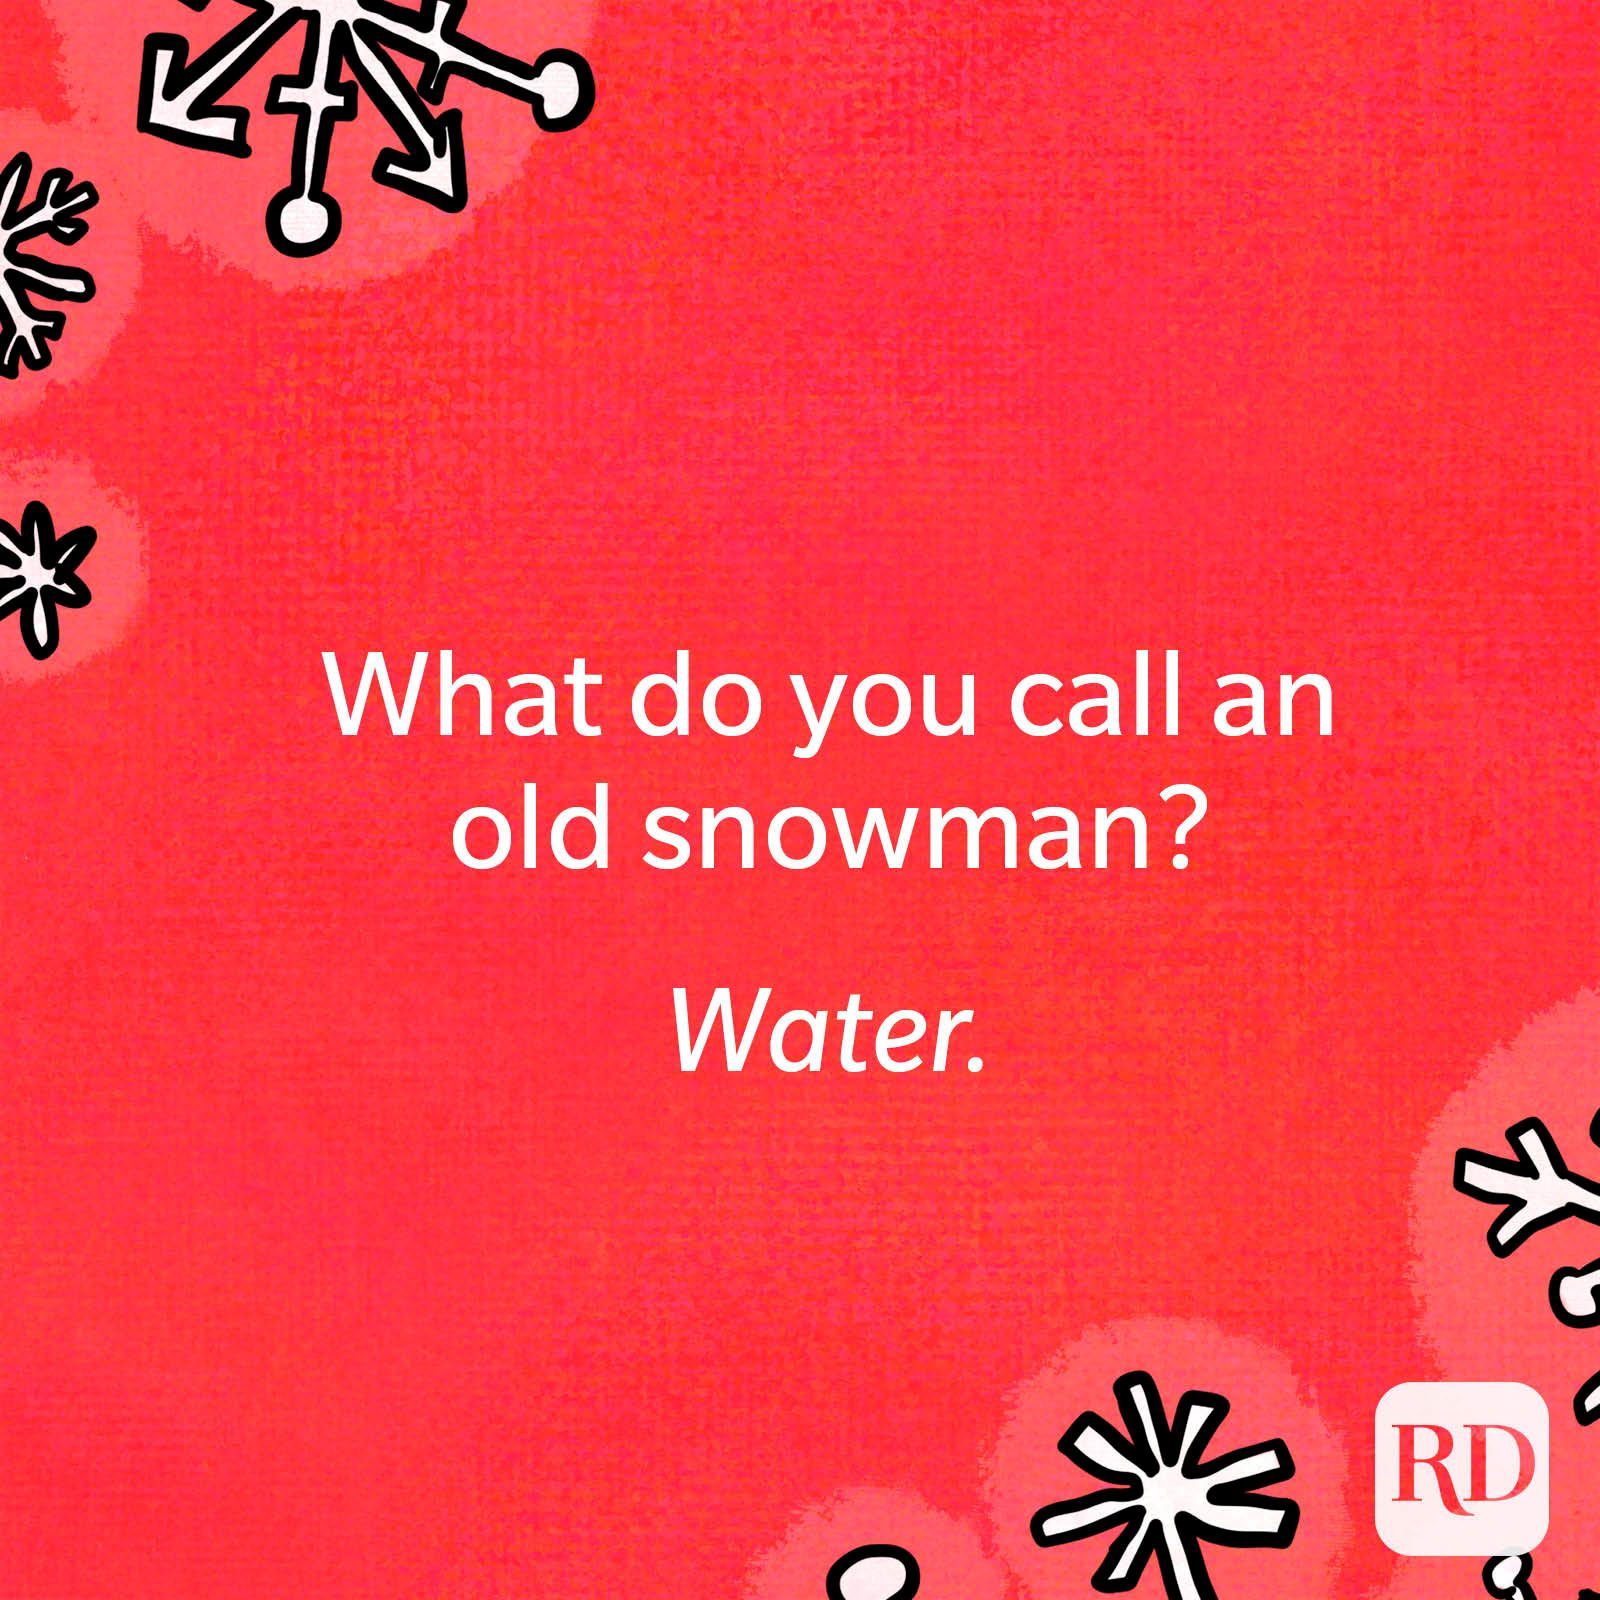 What do you call an old snowman? Water.